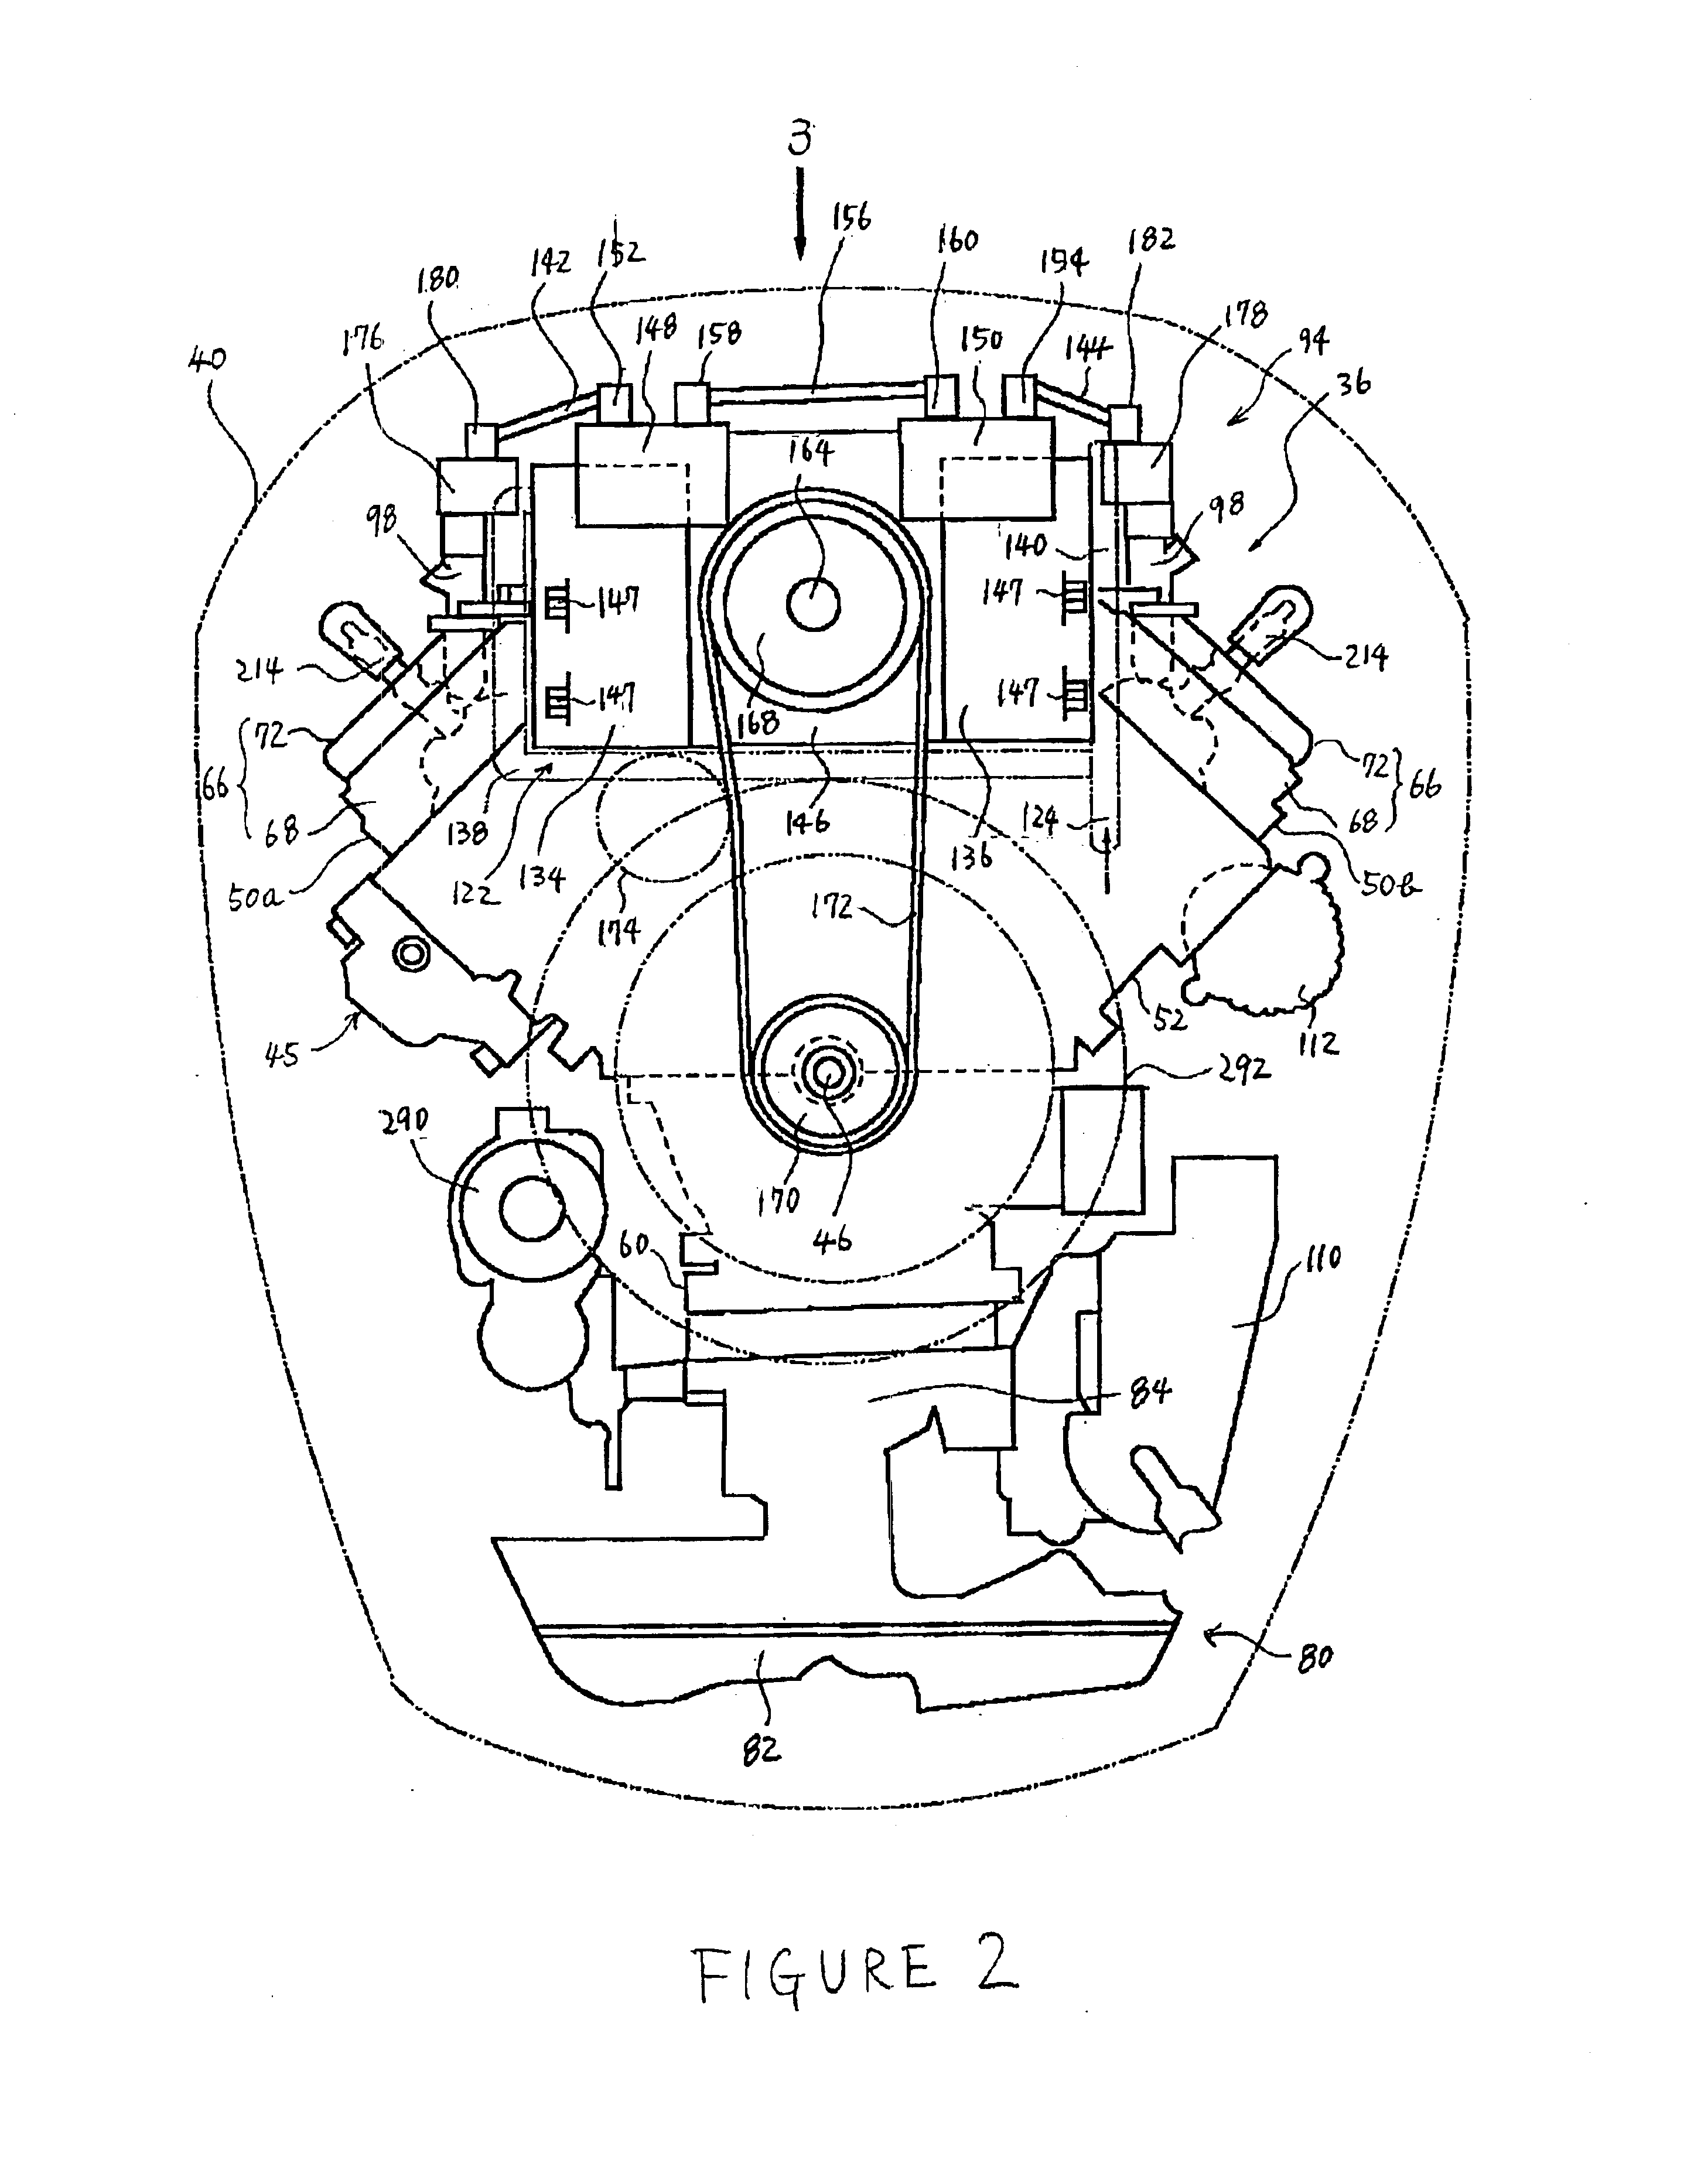 Engine with fuel injection system